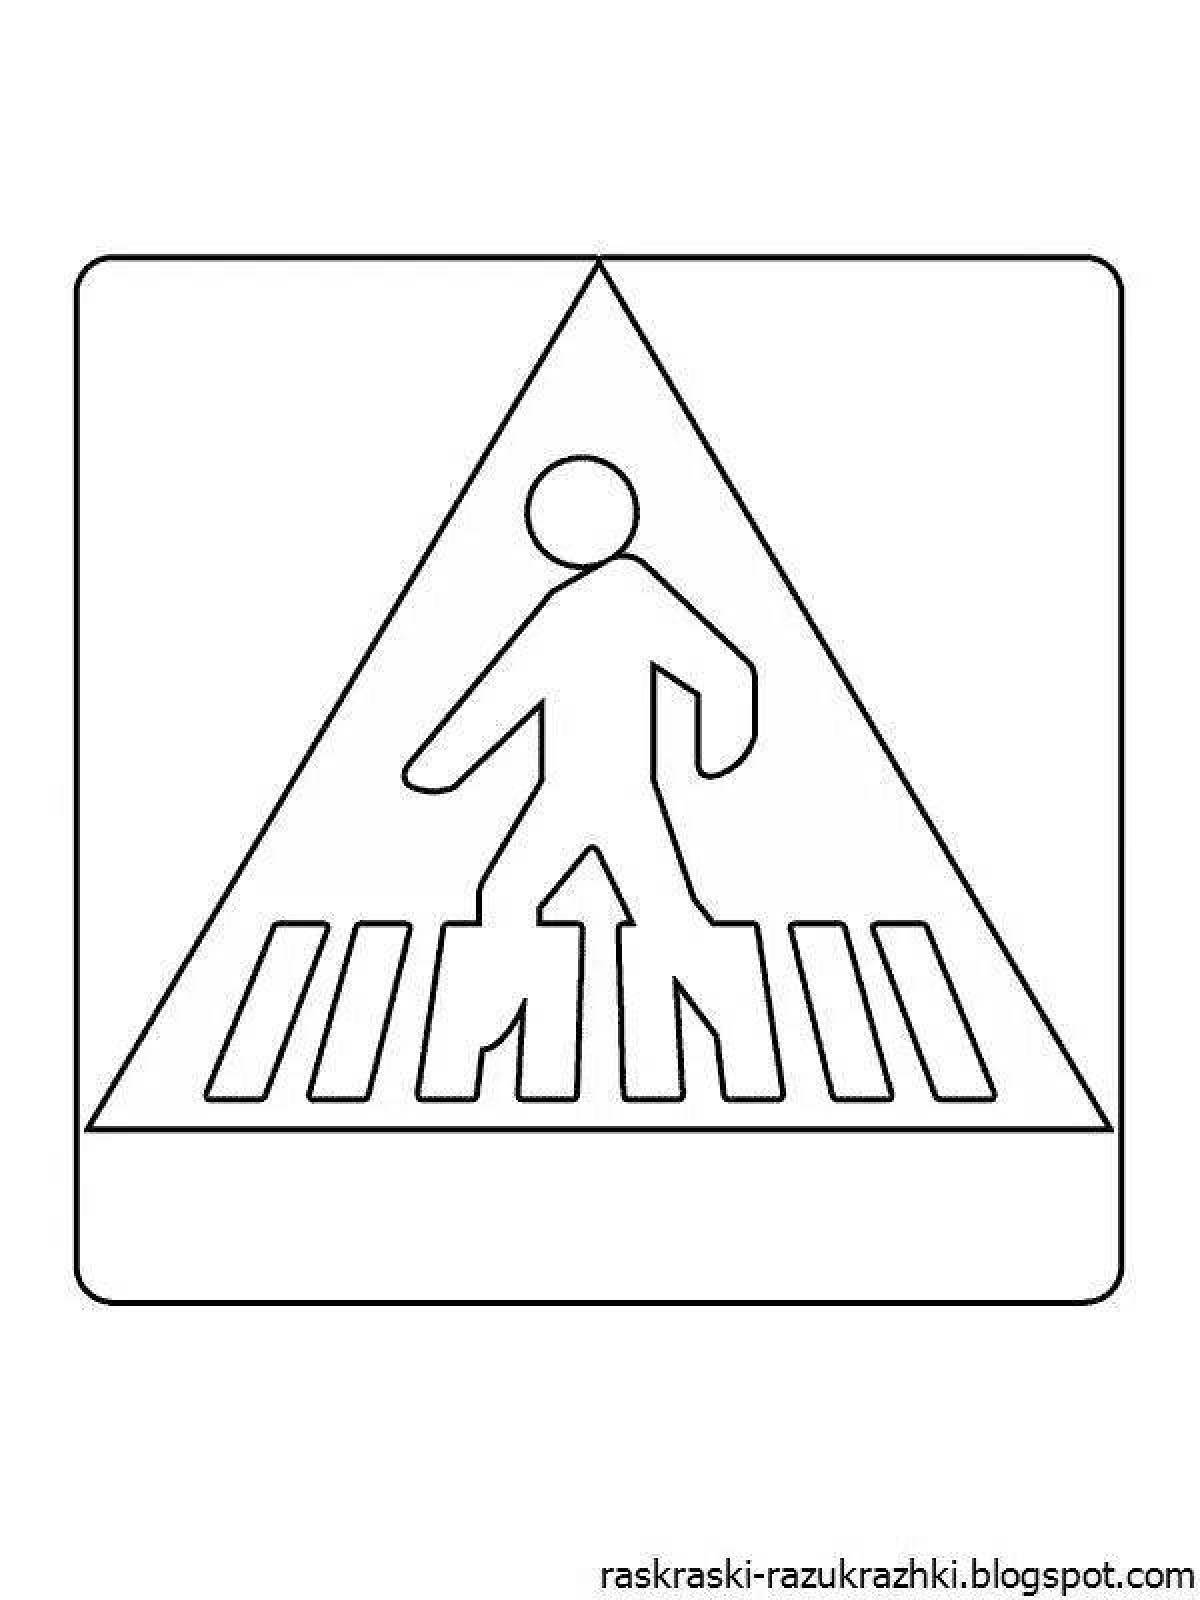 Coloring page relaxing crosswalk road sign